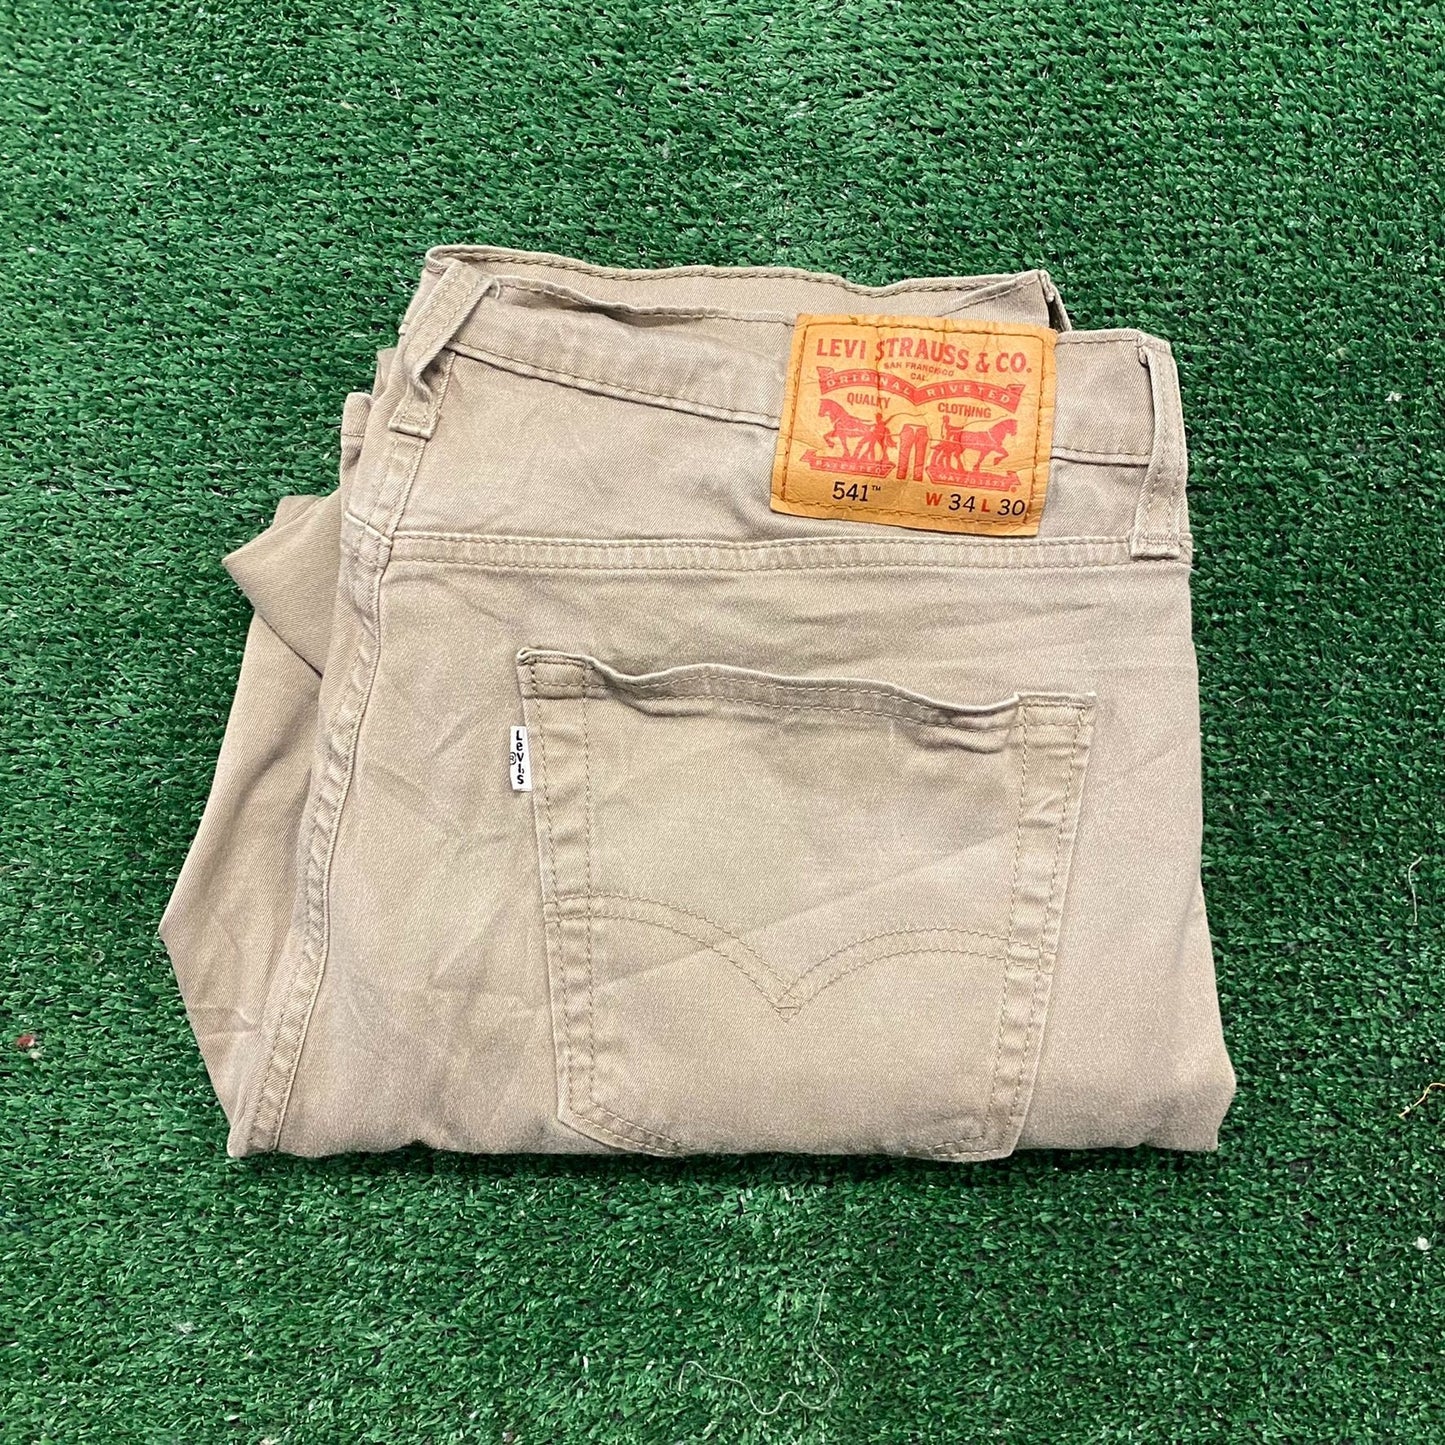 Levi's 541 Tapered Athletic Fit Vintage Khakis Chinos Pants